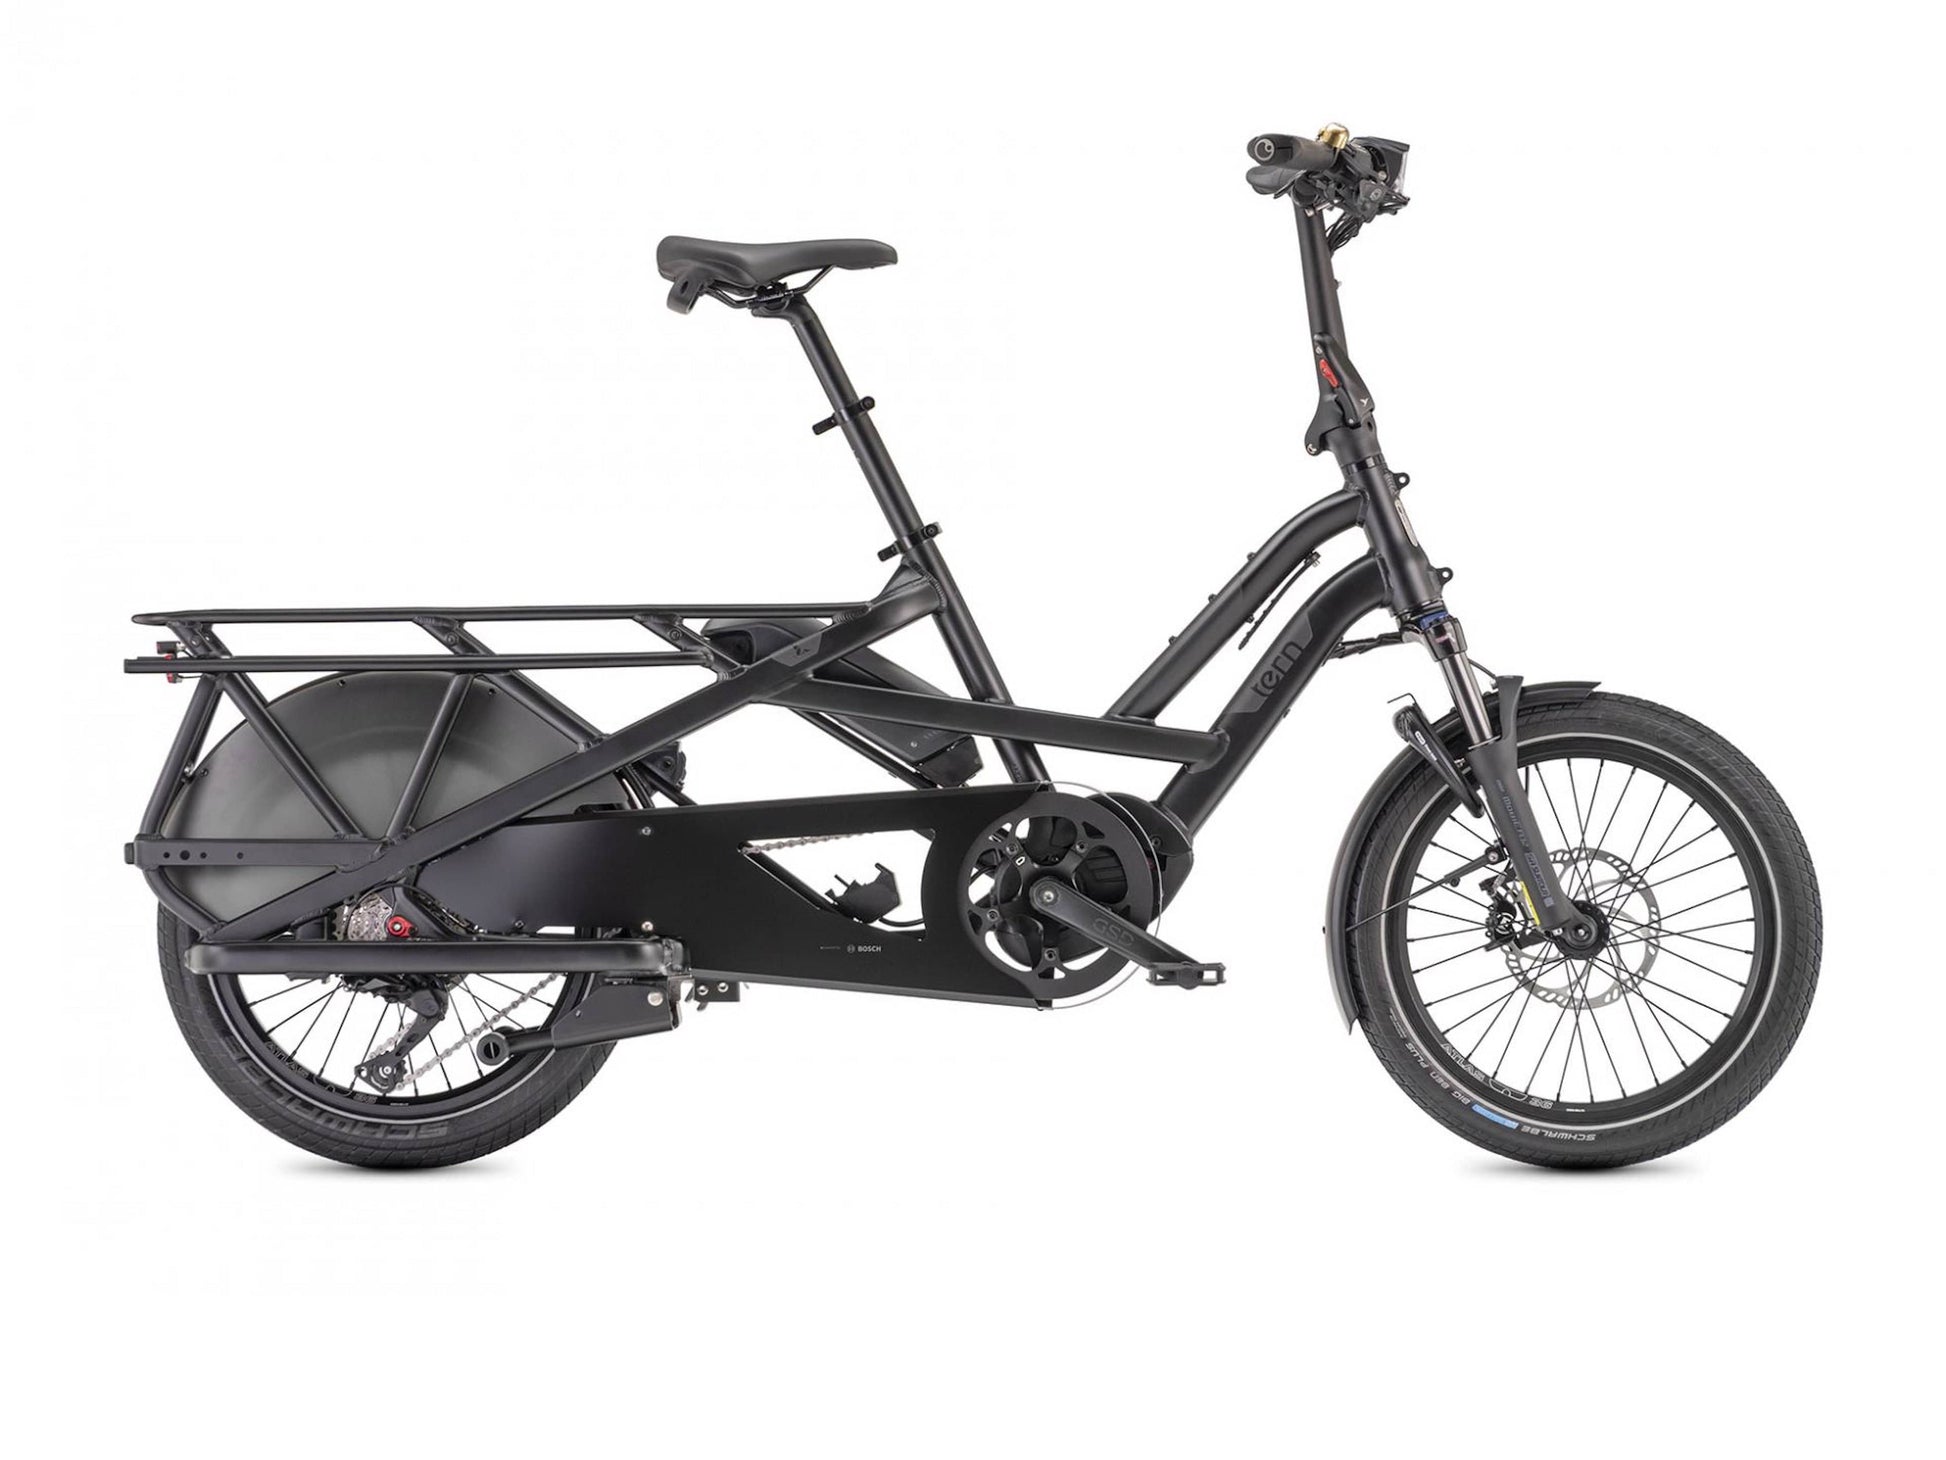 Tern GSD S10 electric cargo bike satin black side view on Fly Rides